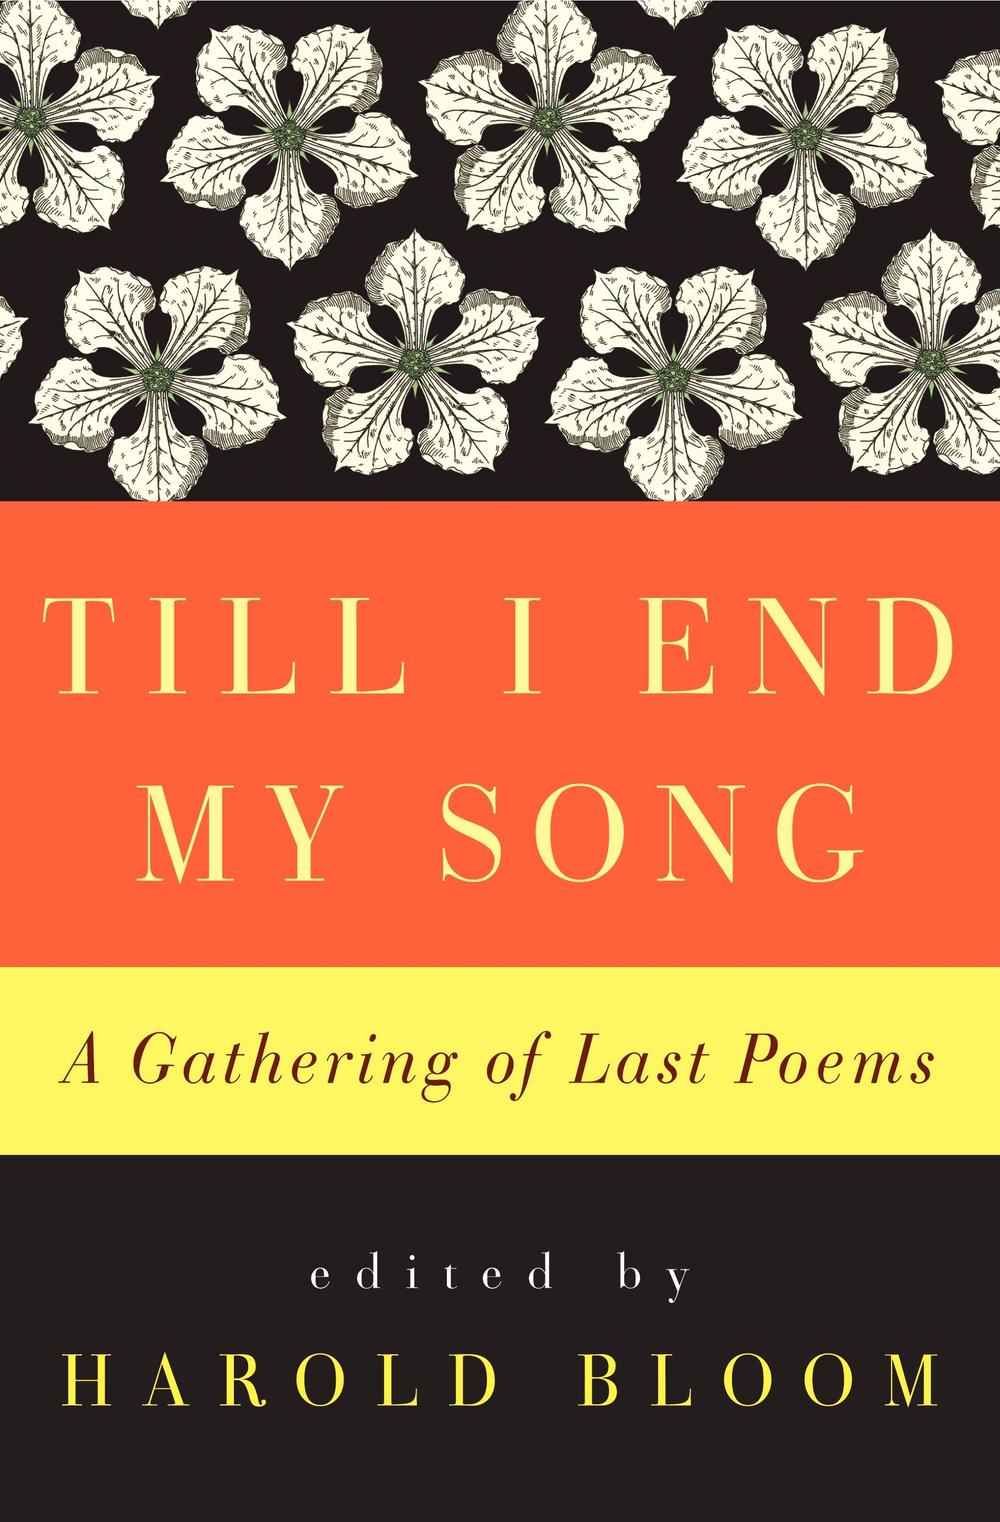 "Till I End My Song" by Harold Bloom